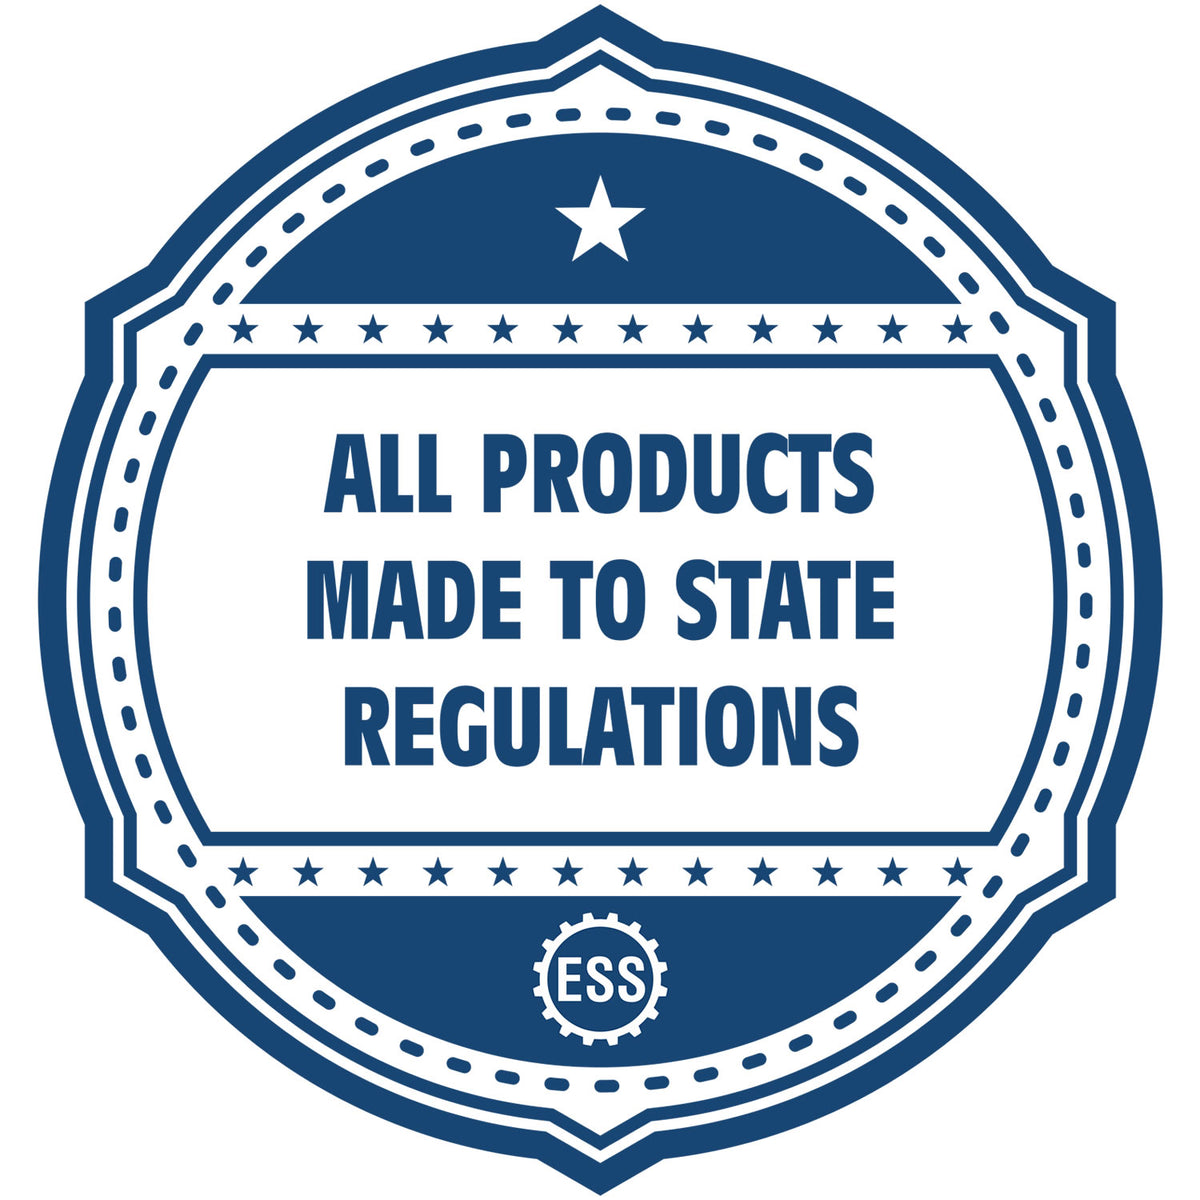 An icon or badge element for the Slim Pre-Inked Arizona Architect Seal Stamp showing that this product is made in compliance with state regulations.